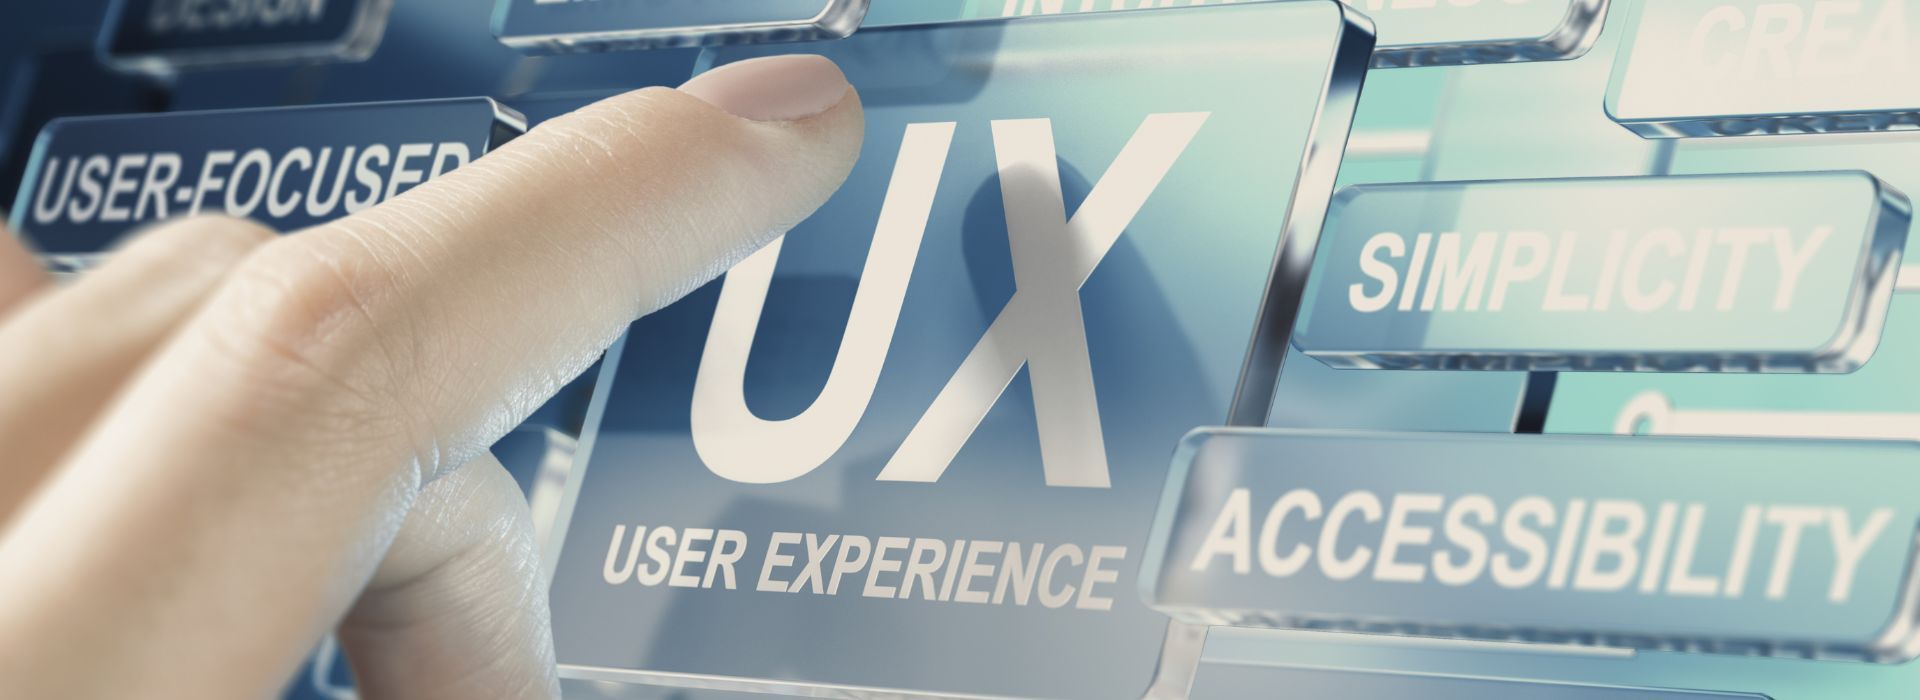 The vaule of a good UX: user experience